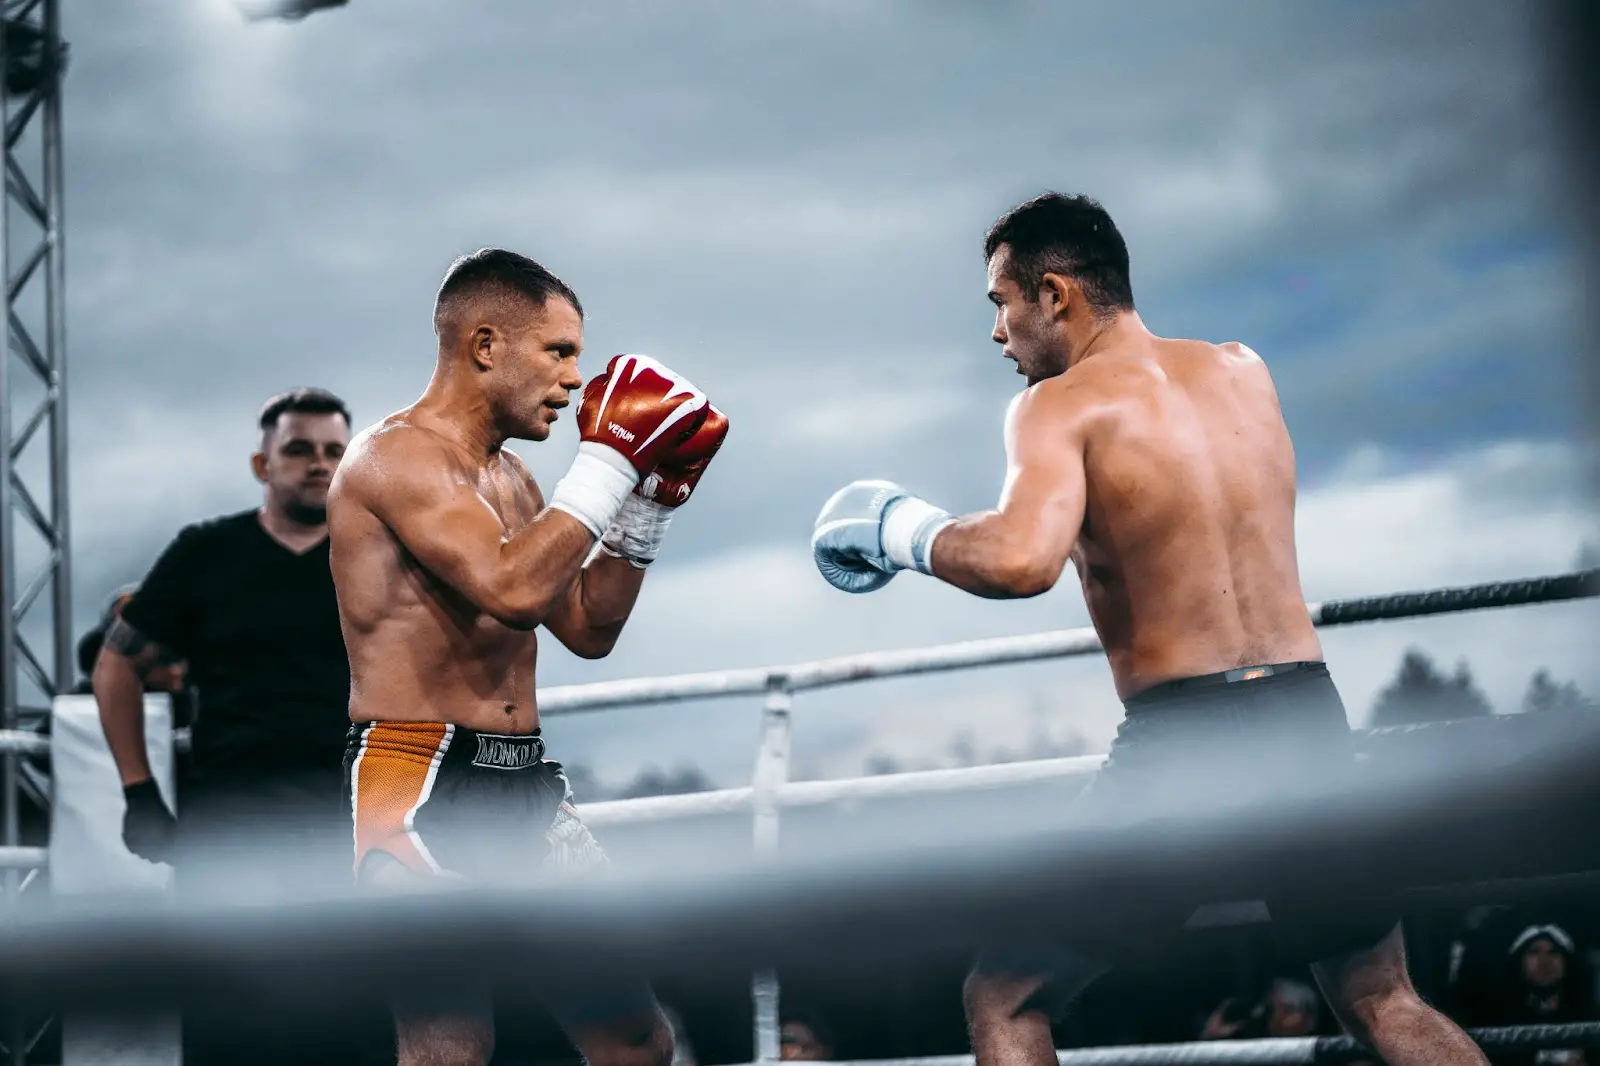 Muay Thai Camp of Boxing in Thailand for a Thrilling Experience